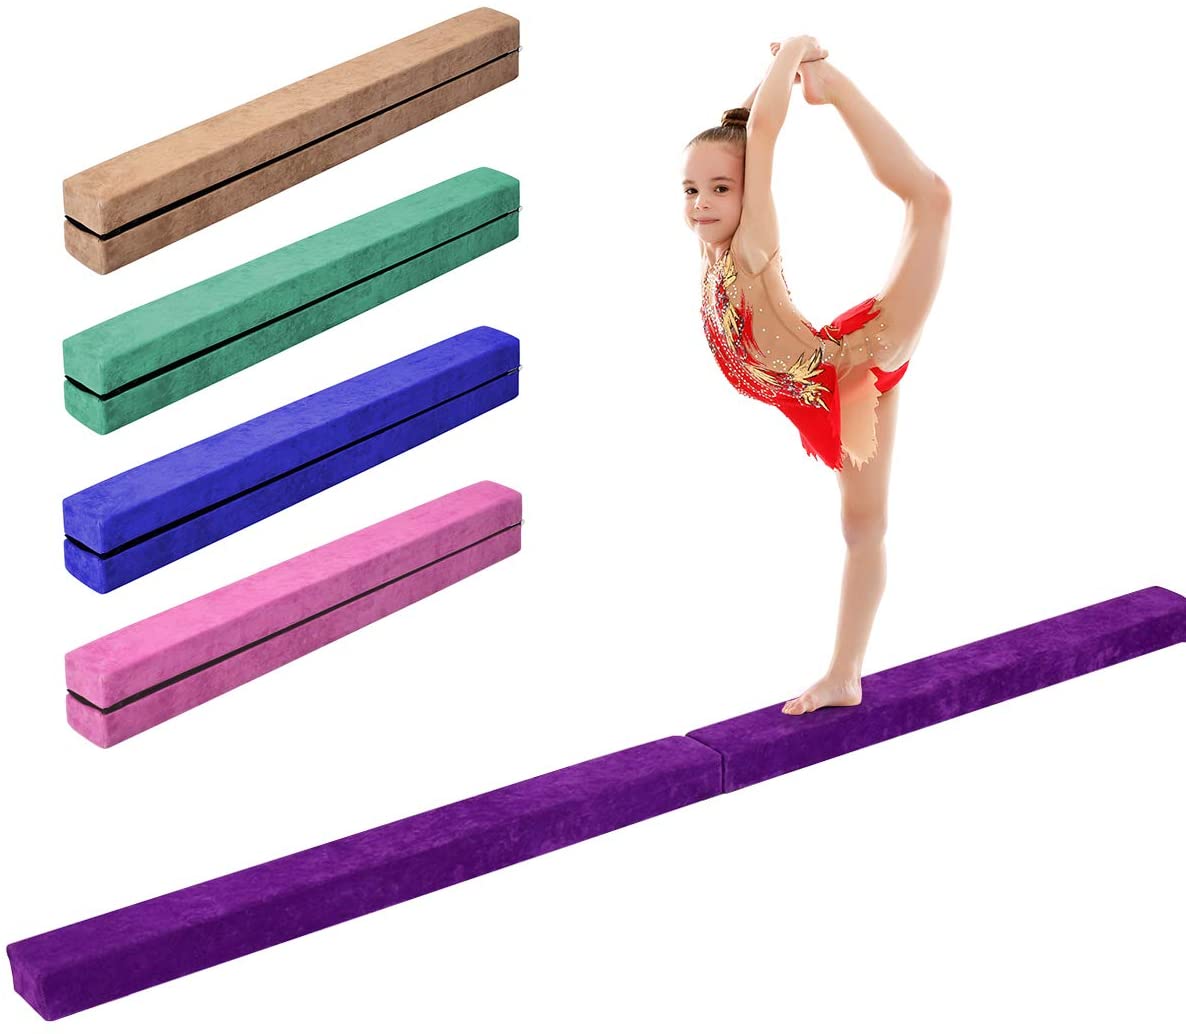 Foam Floor Balance Beam Non-Slip Rubber Base 7FT/8FT Balance Beam w/Carry Handles Anti-Slip Base for Kids Beginners & Professional Gymnasts and Beginners Athletes Folding Gymnastics Balance Beam 